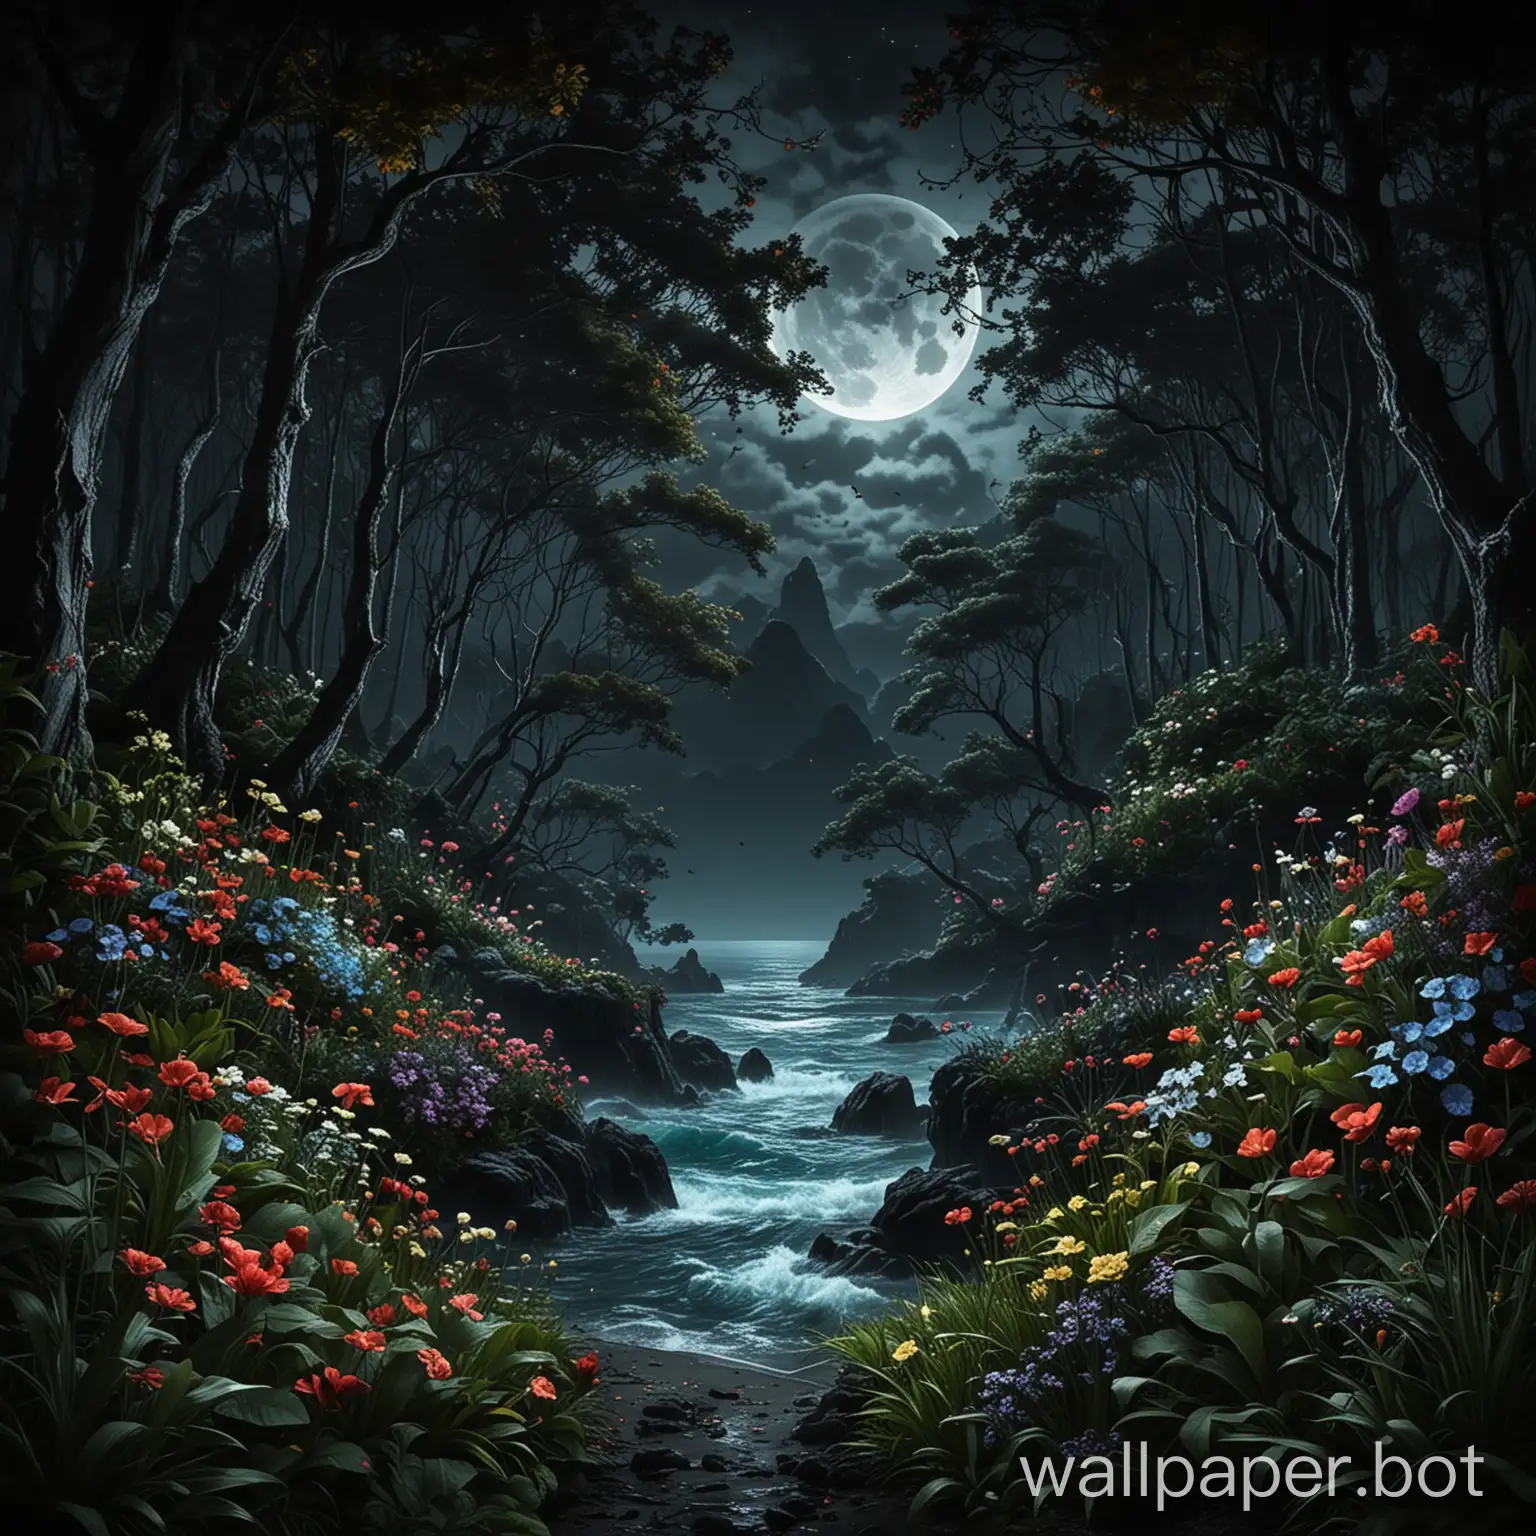 In the dark forest with many flowers and plants and dark moon and sea